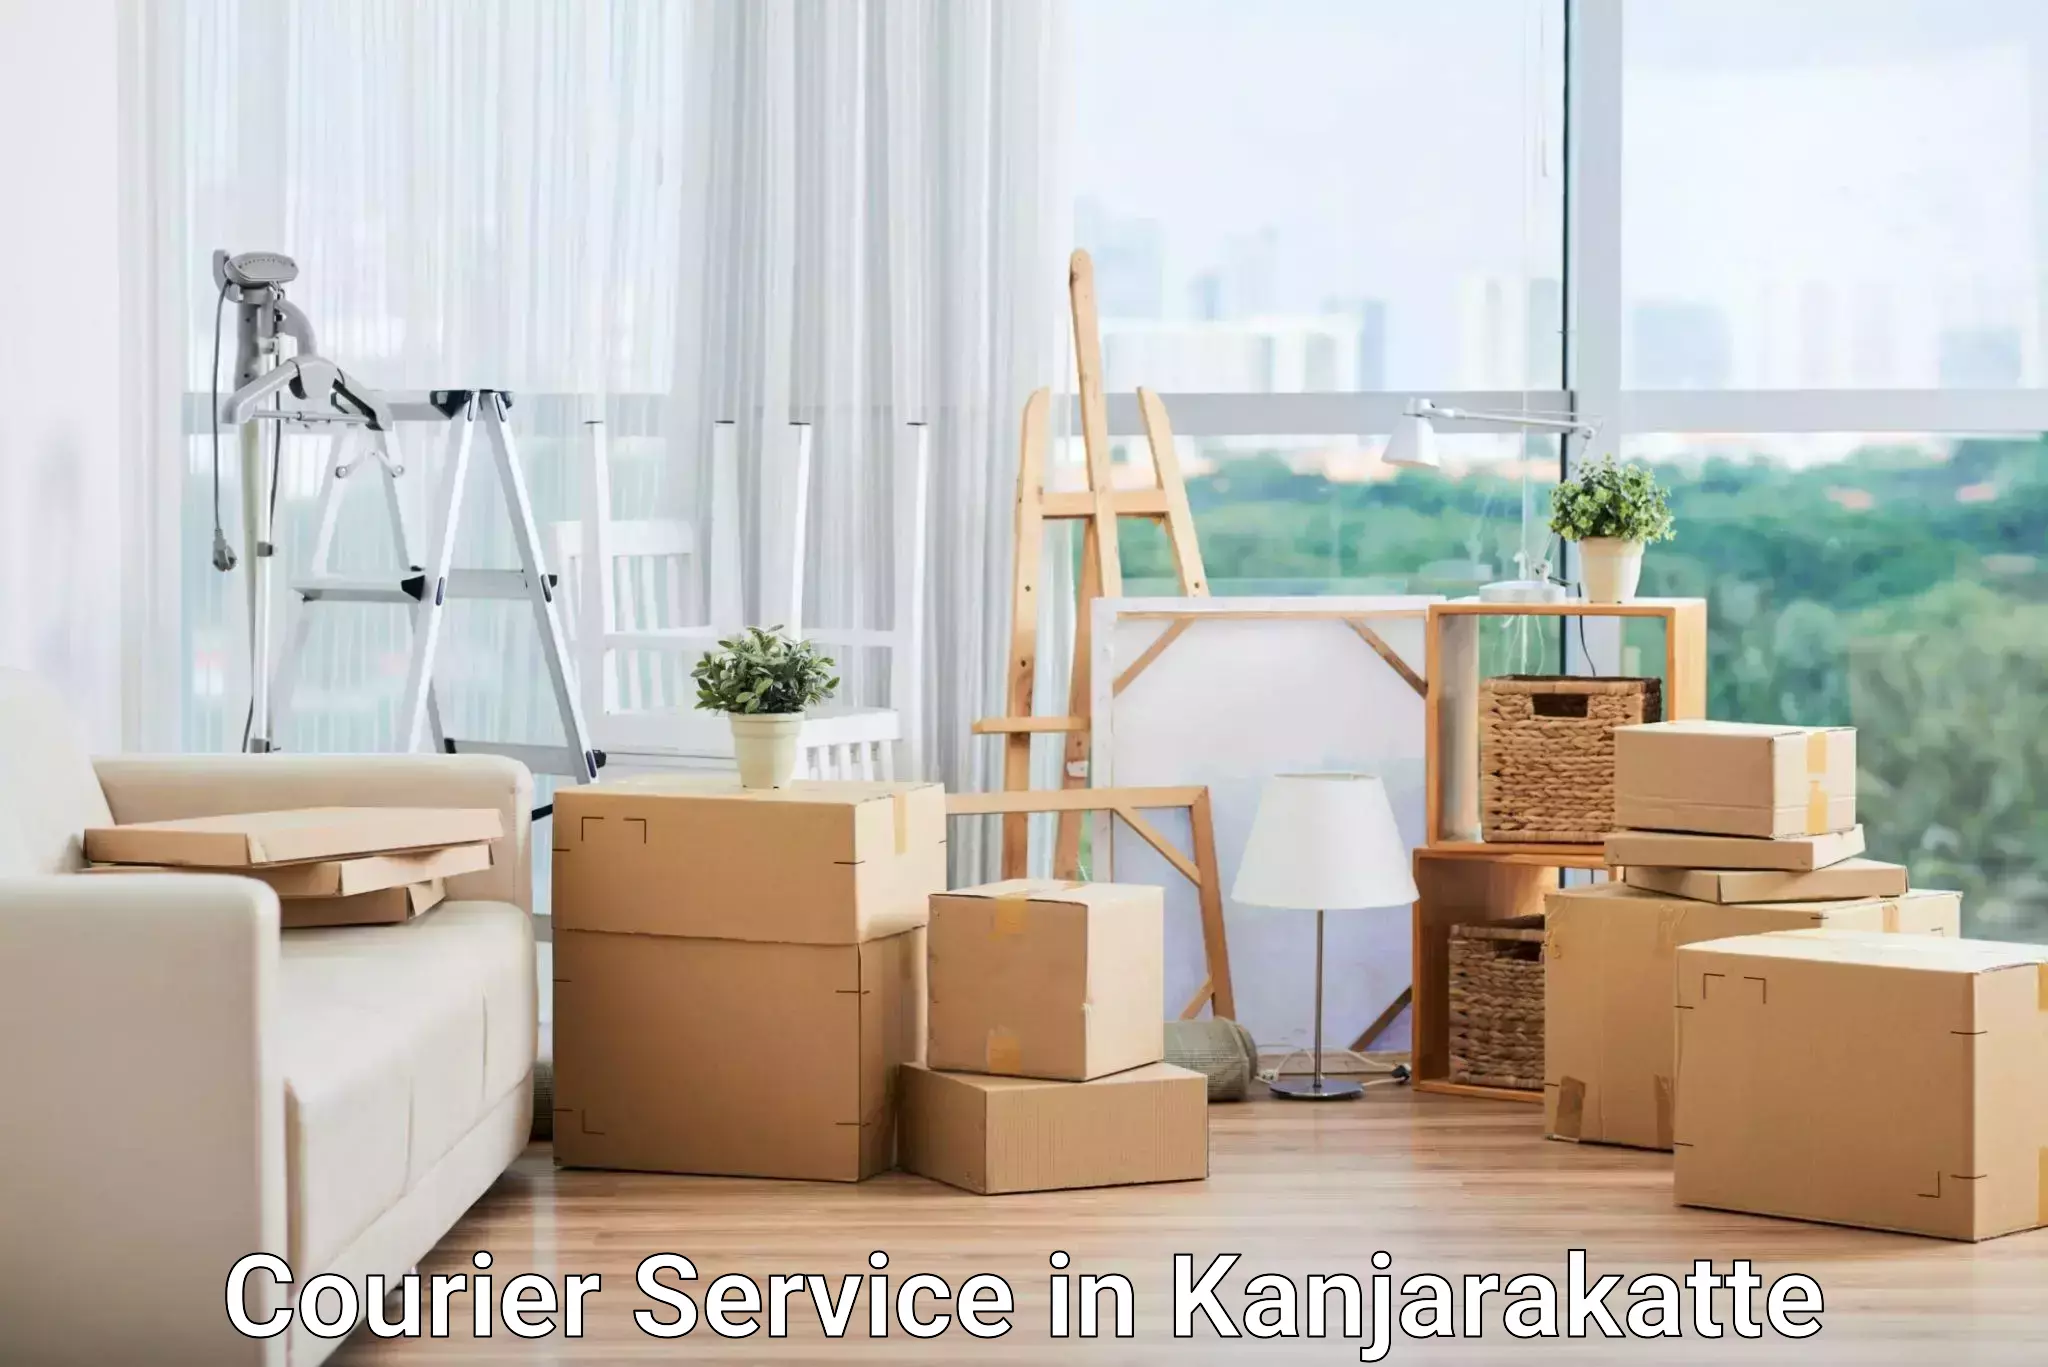 Next-day delivery options in Kanjarakatte